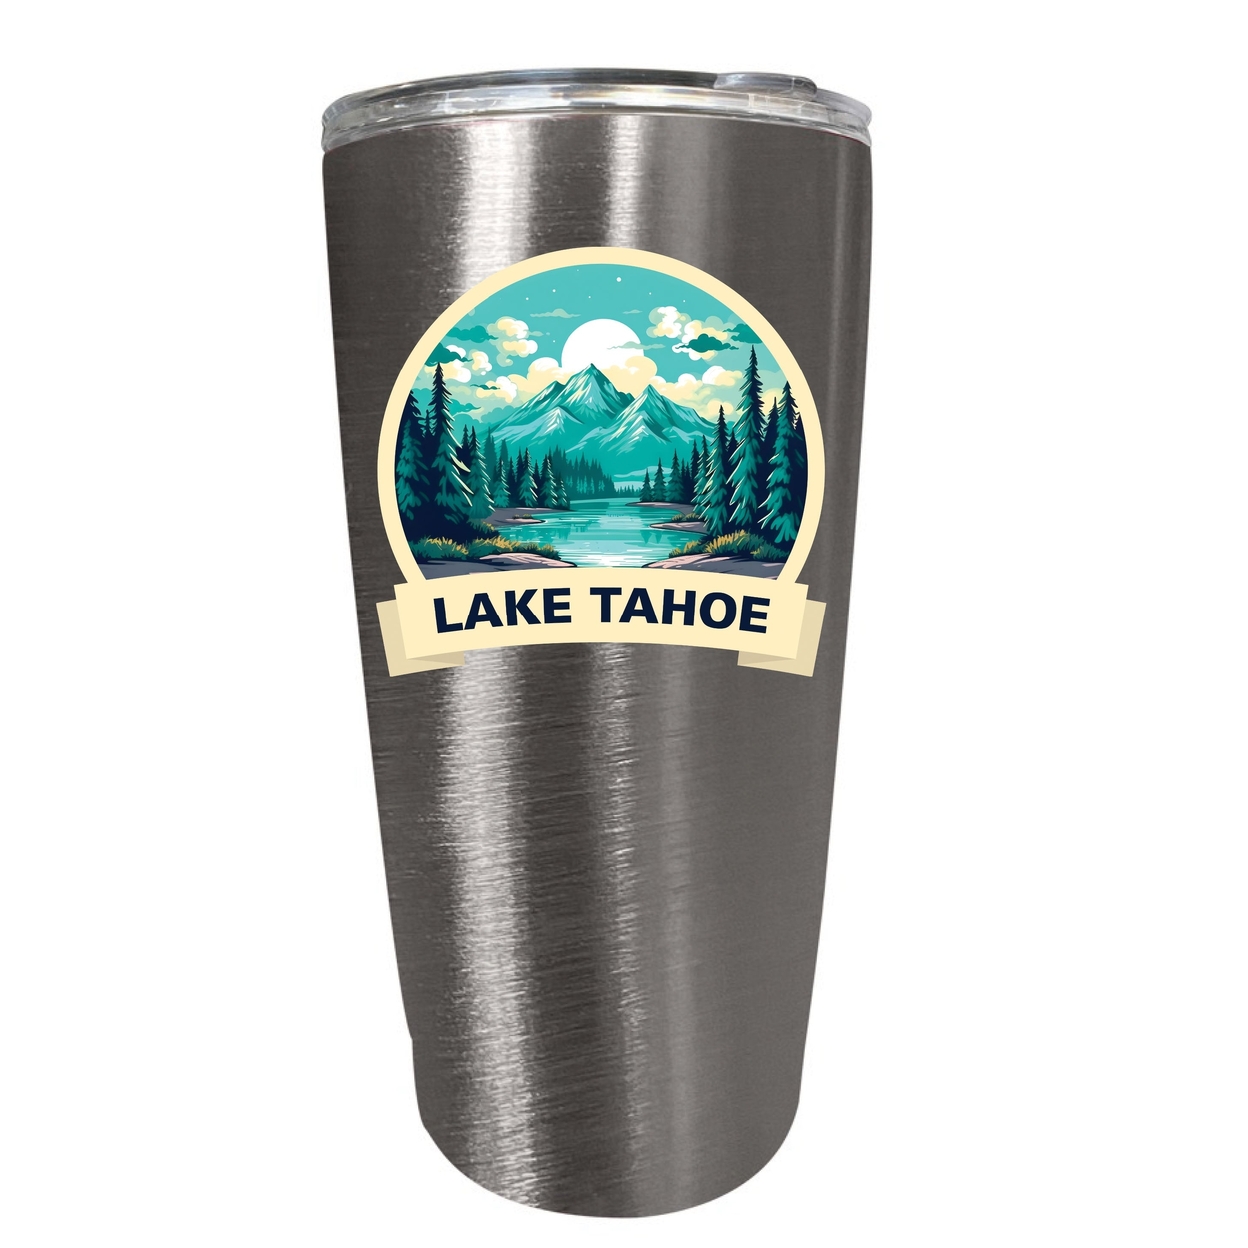 Lake Tahoe California Souvenir 16 Oz Stainless Steel Insulated Tumbler - Pink,,4-Pack